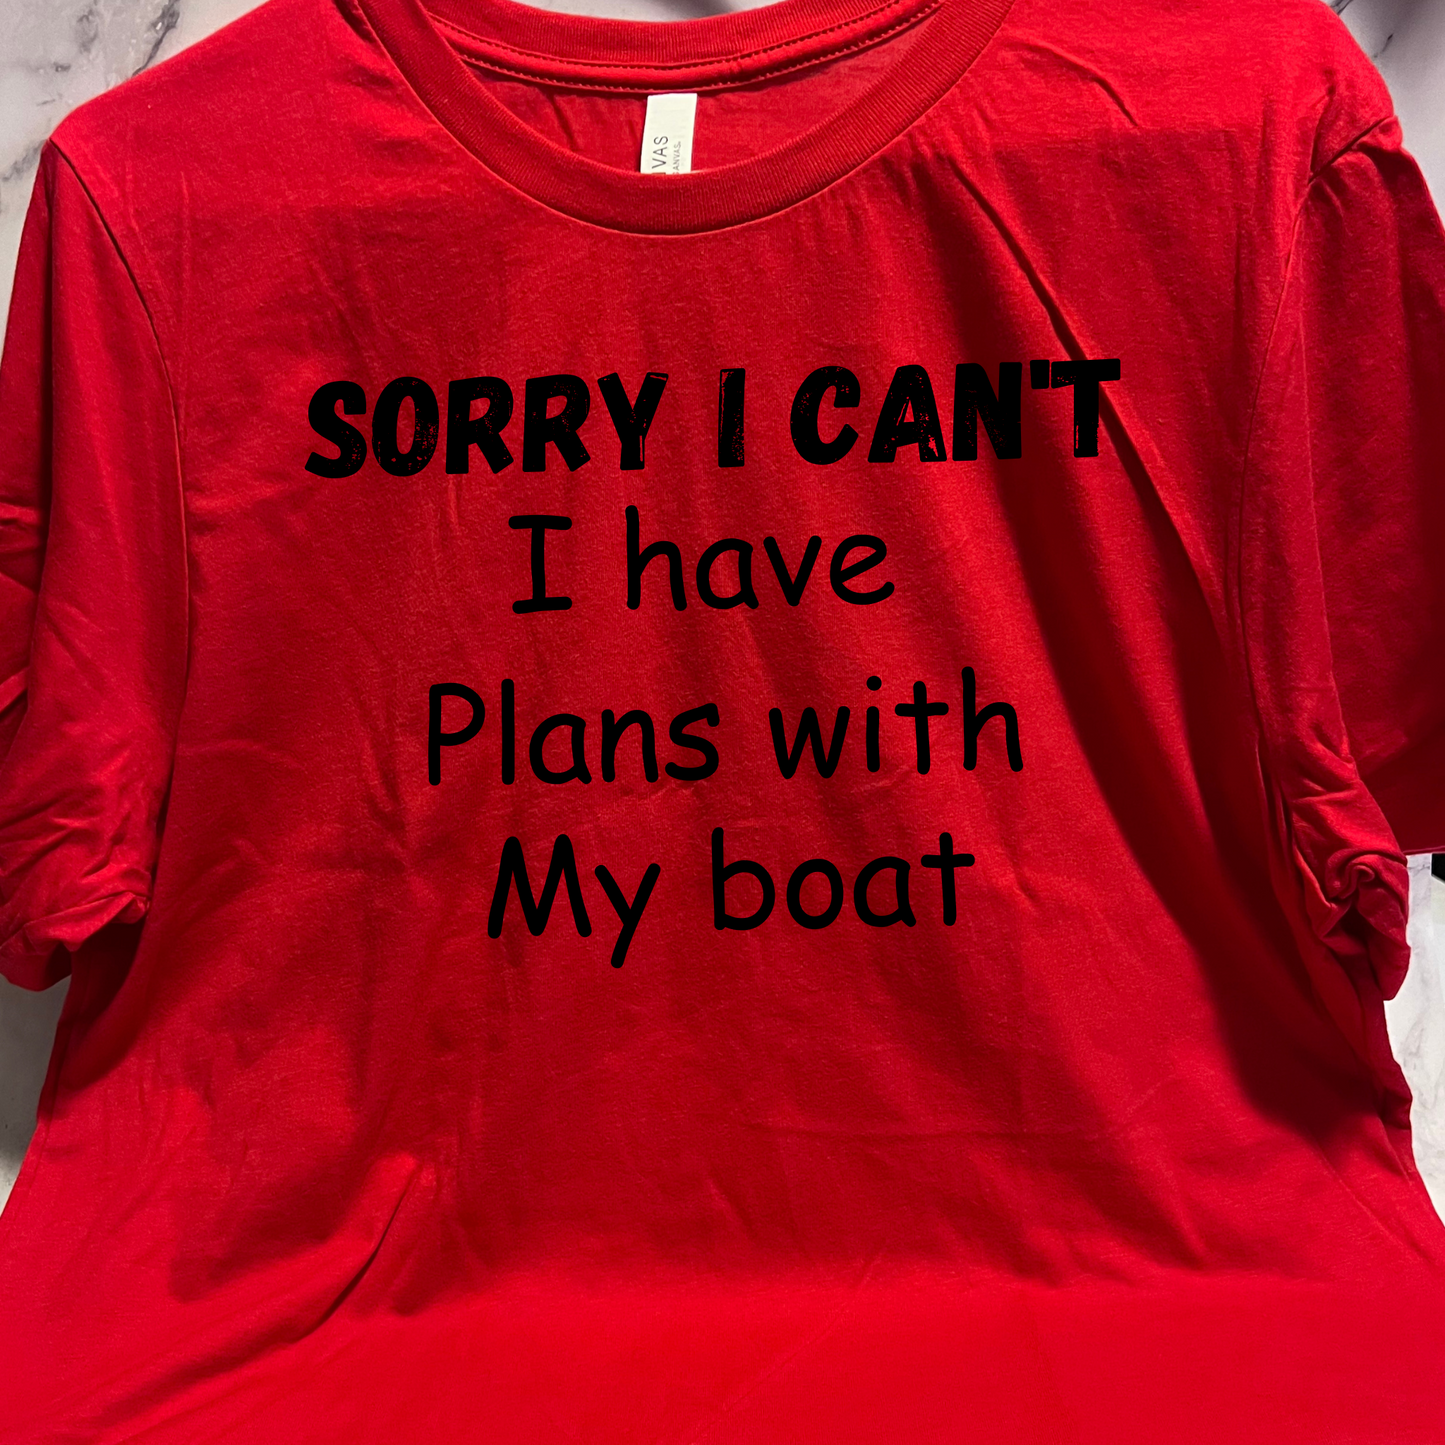 Sorry I can't, Funny boat shirt, short sleeve unisex t-shirt, for men or women